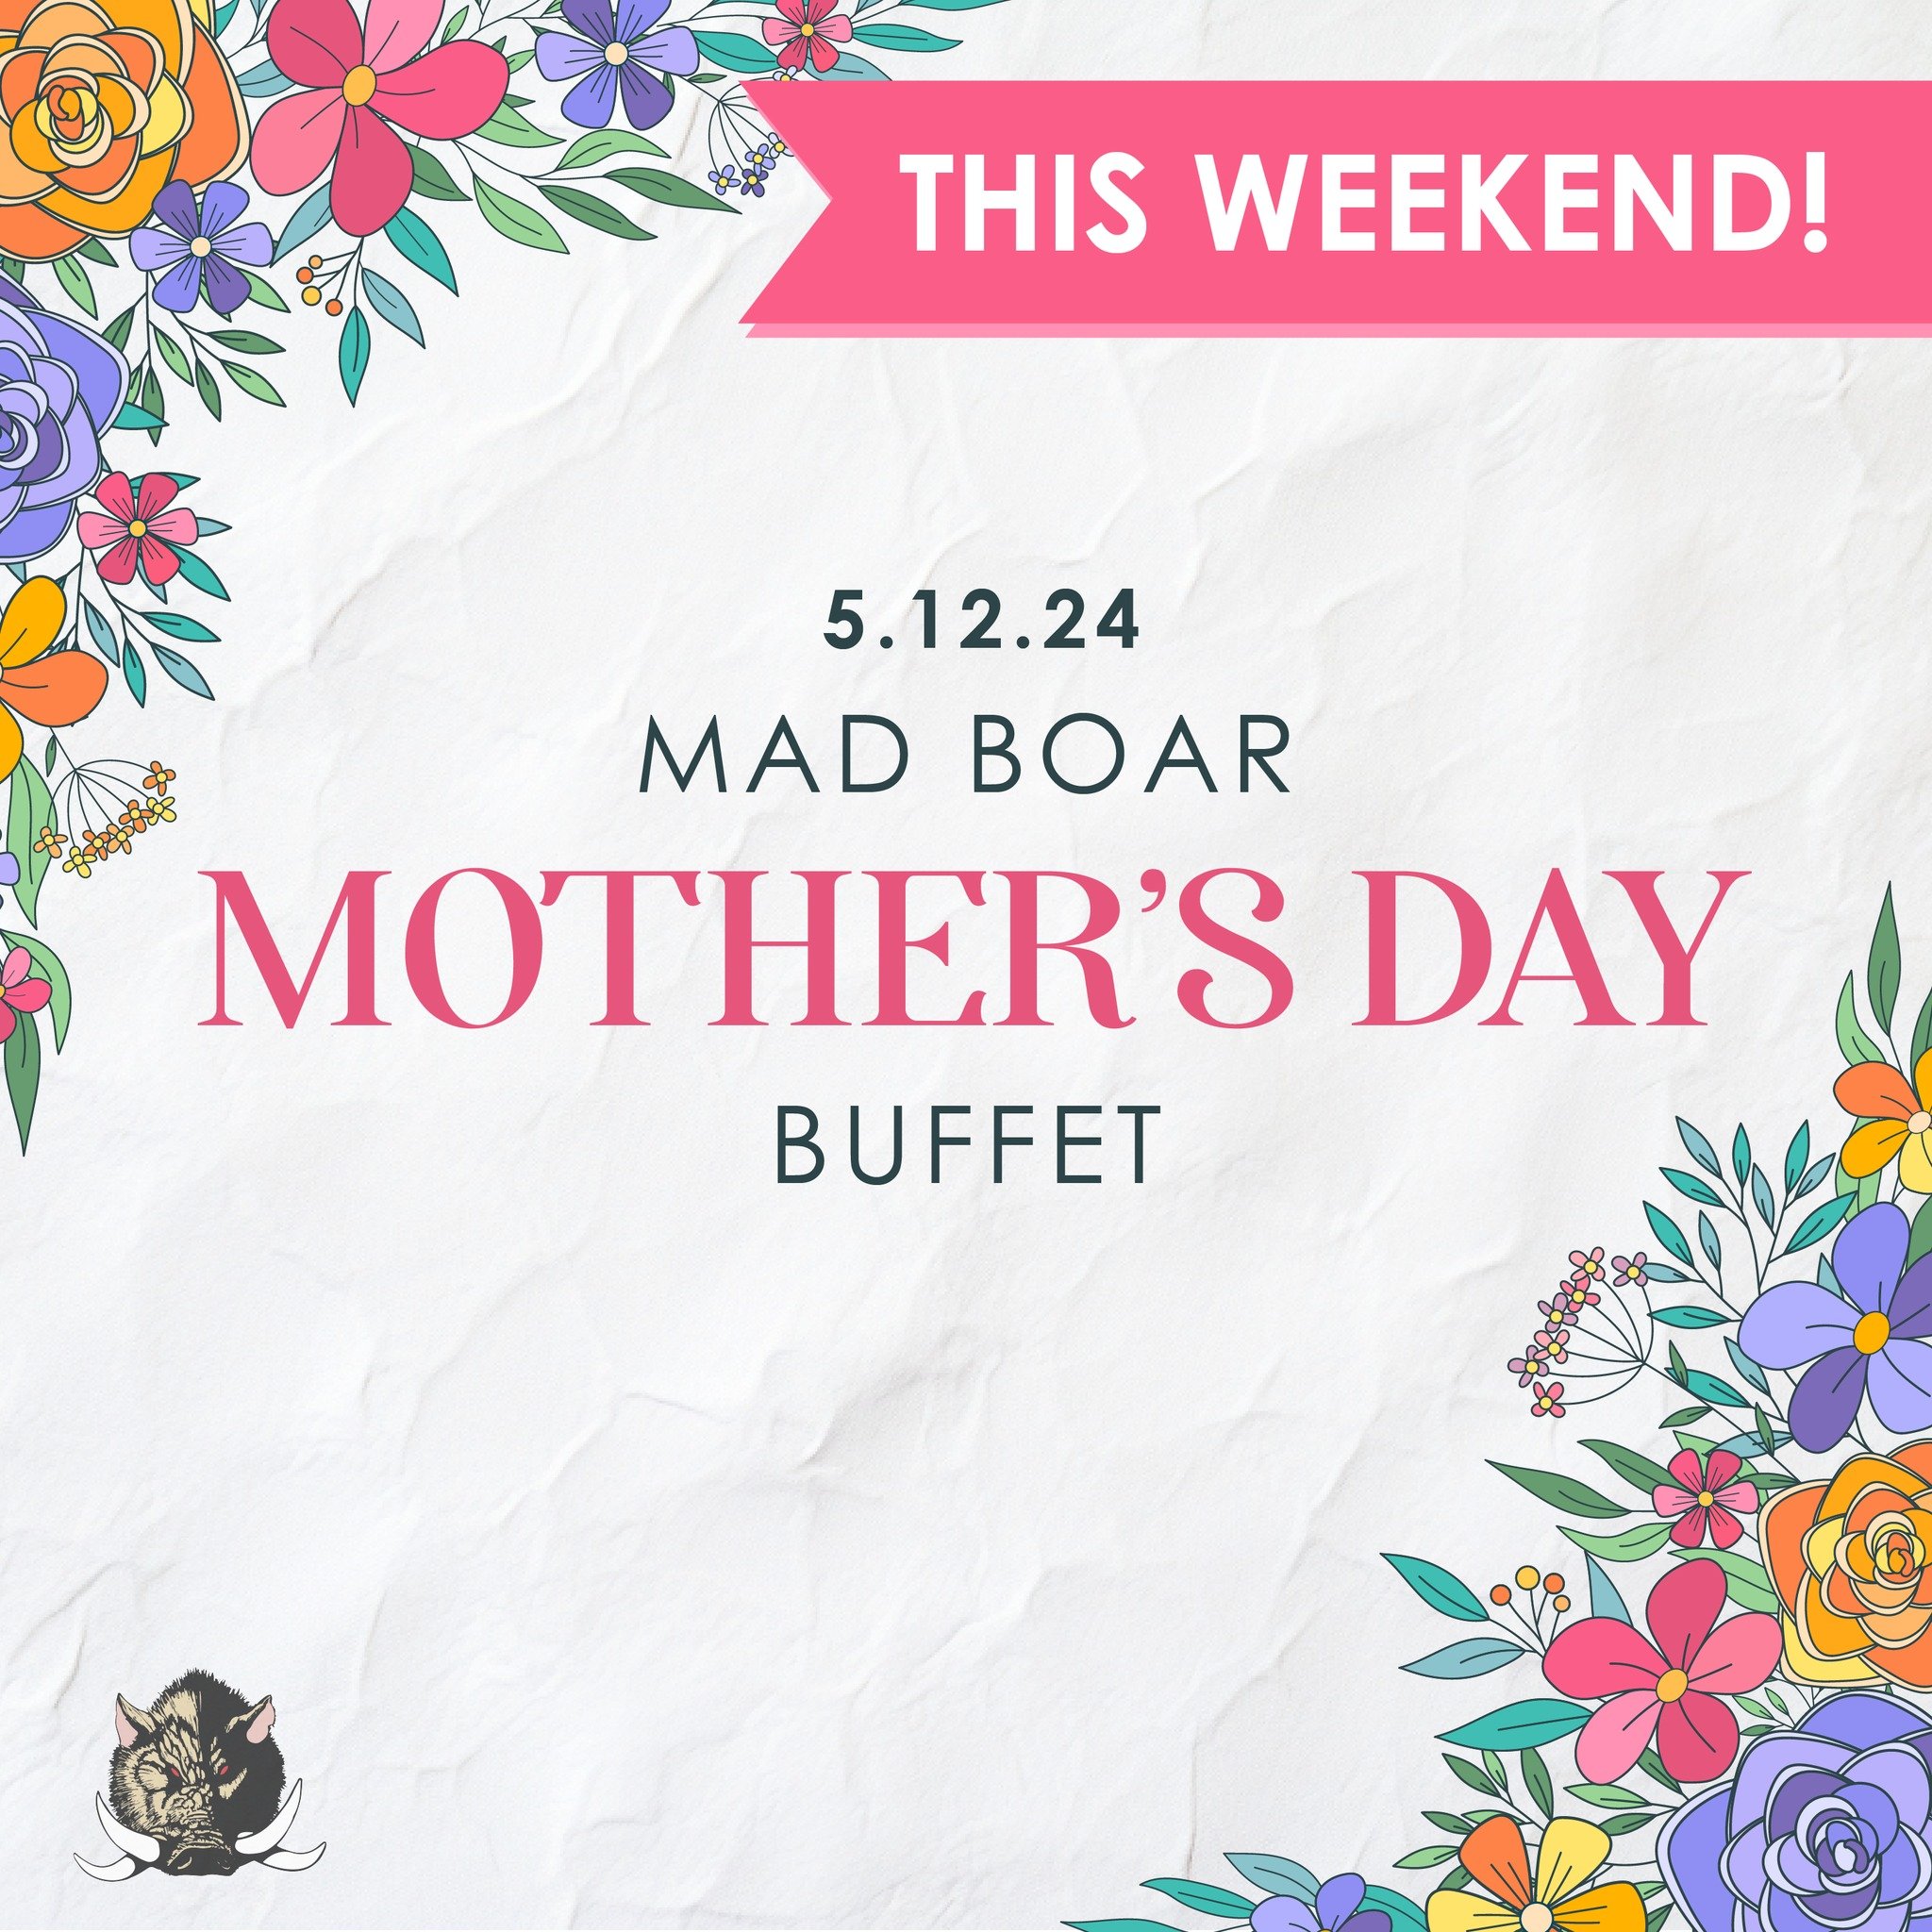 Why stress about cooking when you can celebrate with us? Reserve your spot for a stress-free and delicious Mother's Day meal this weekend! Link in bio.

#madbaornc #wallacenc #exit385 #mothersdayspecial #mothersdaytreat #mothersdaylove #mothersdaylun